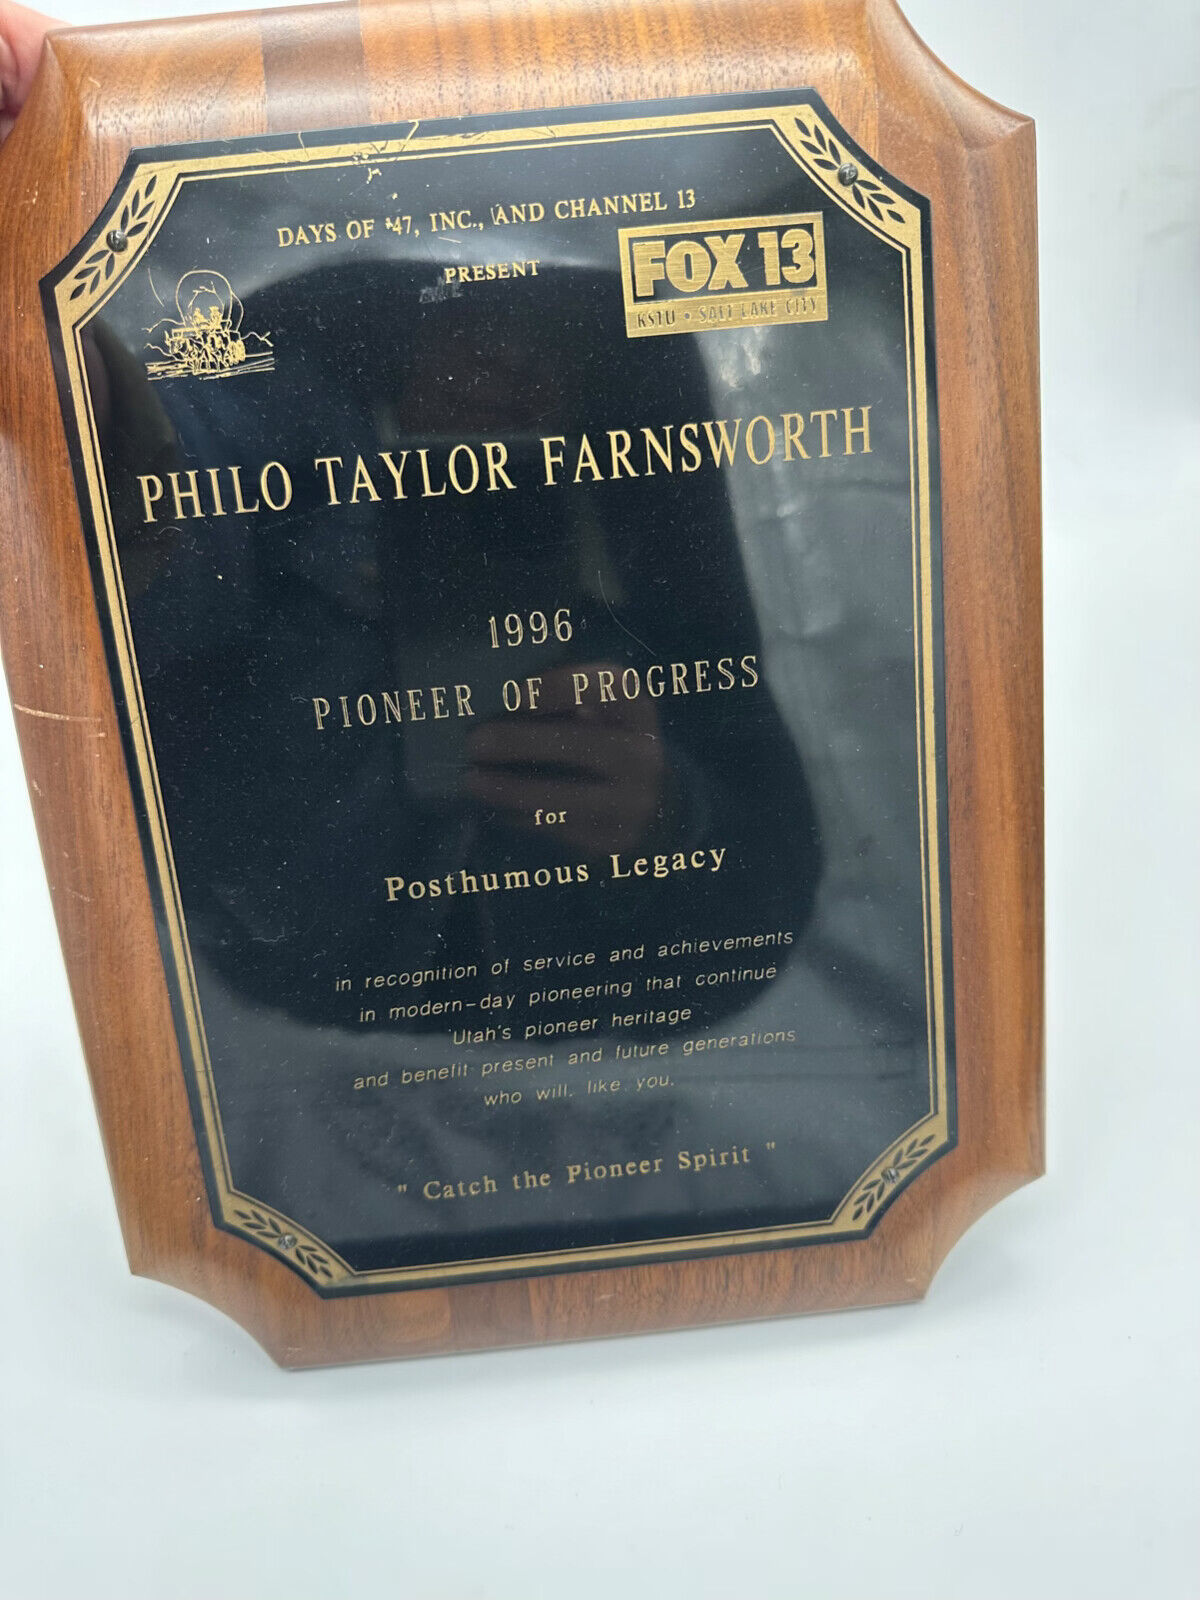 Philo T Farnsworth/inventor/award from Fox after his death/1996